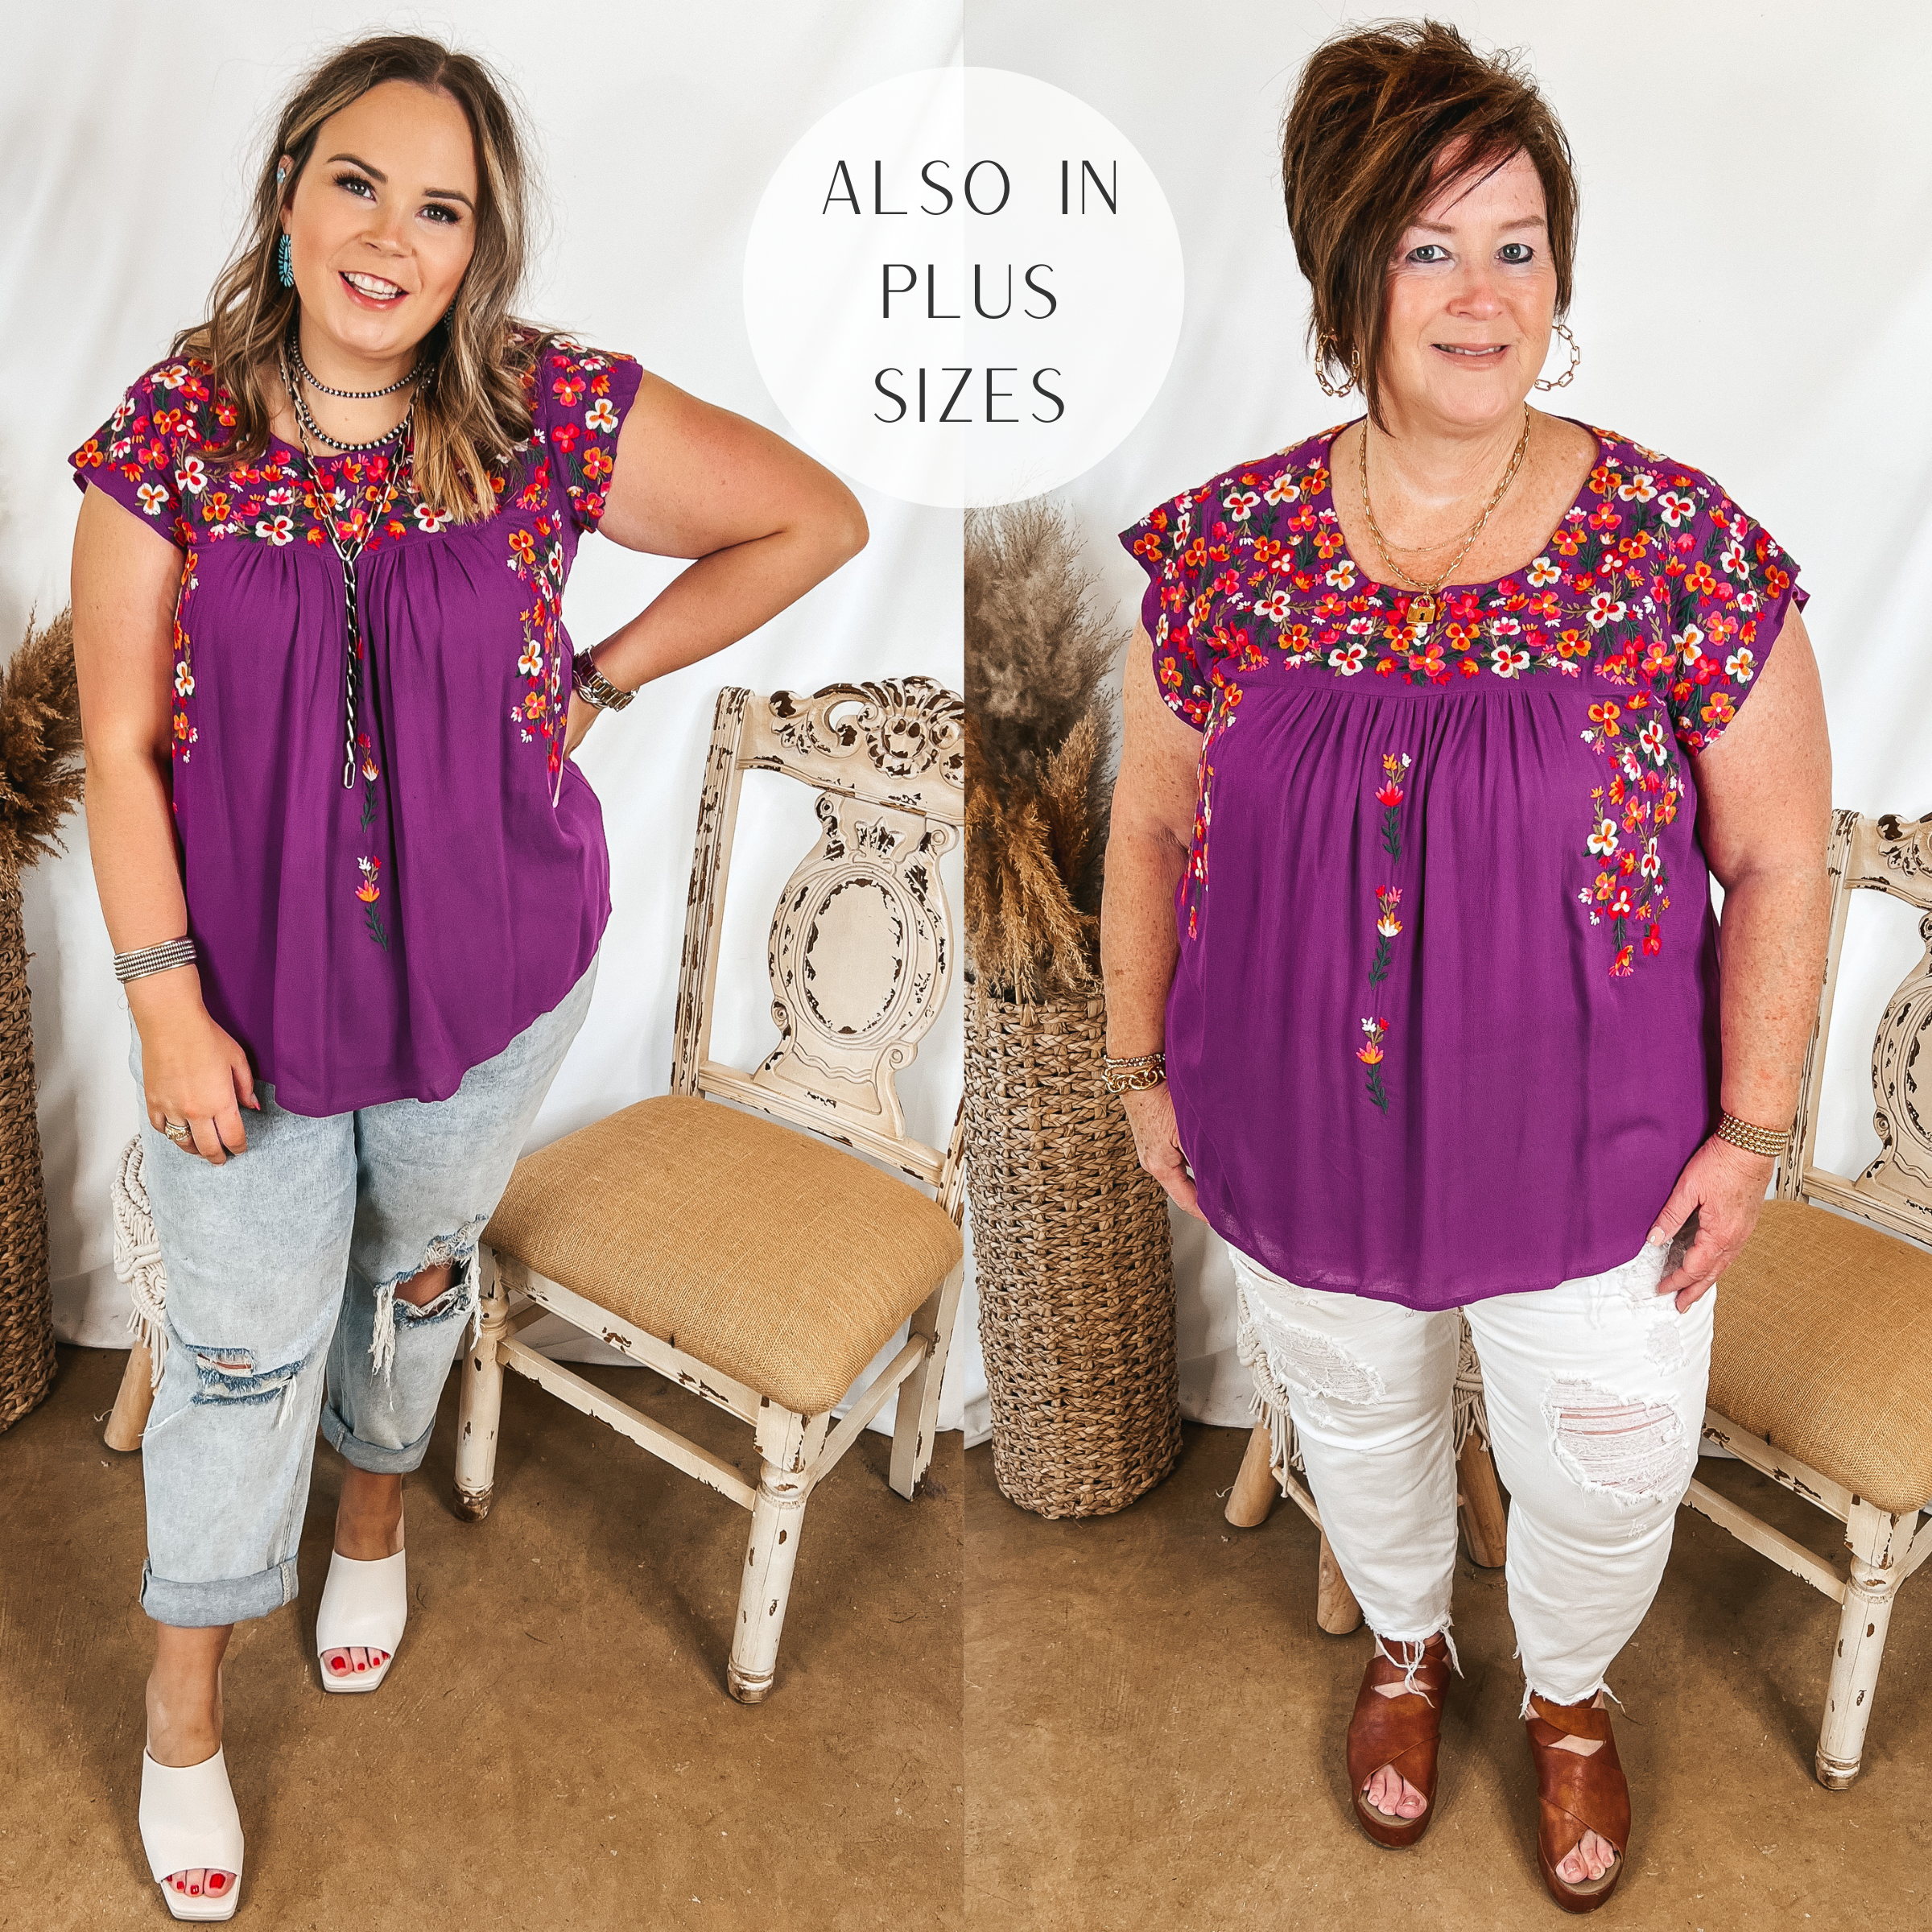 Models are wearing a magenta purple top that has floral embroidery on the top. Size large model has it paired with light wash boyfriend jeans, white heels, and silver jewelry. Plus size model has it paired with white distressed jeans, brown sandals, and gold jewelry.